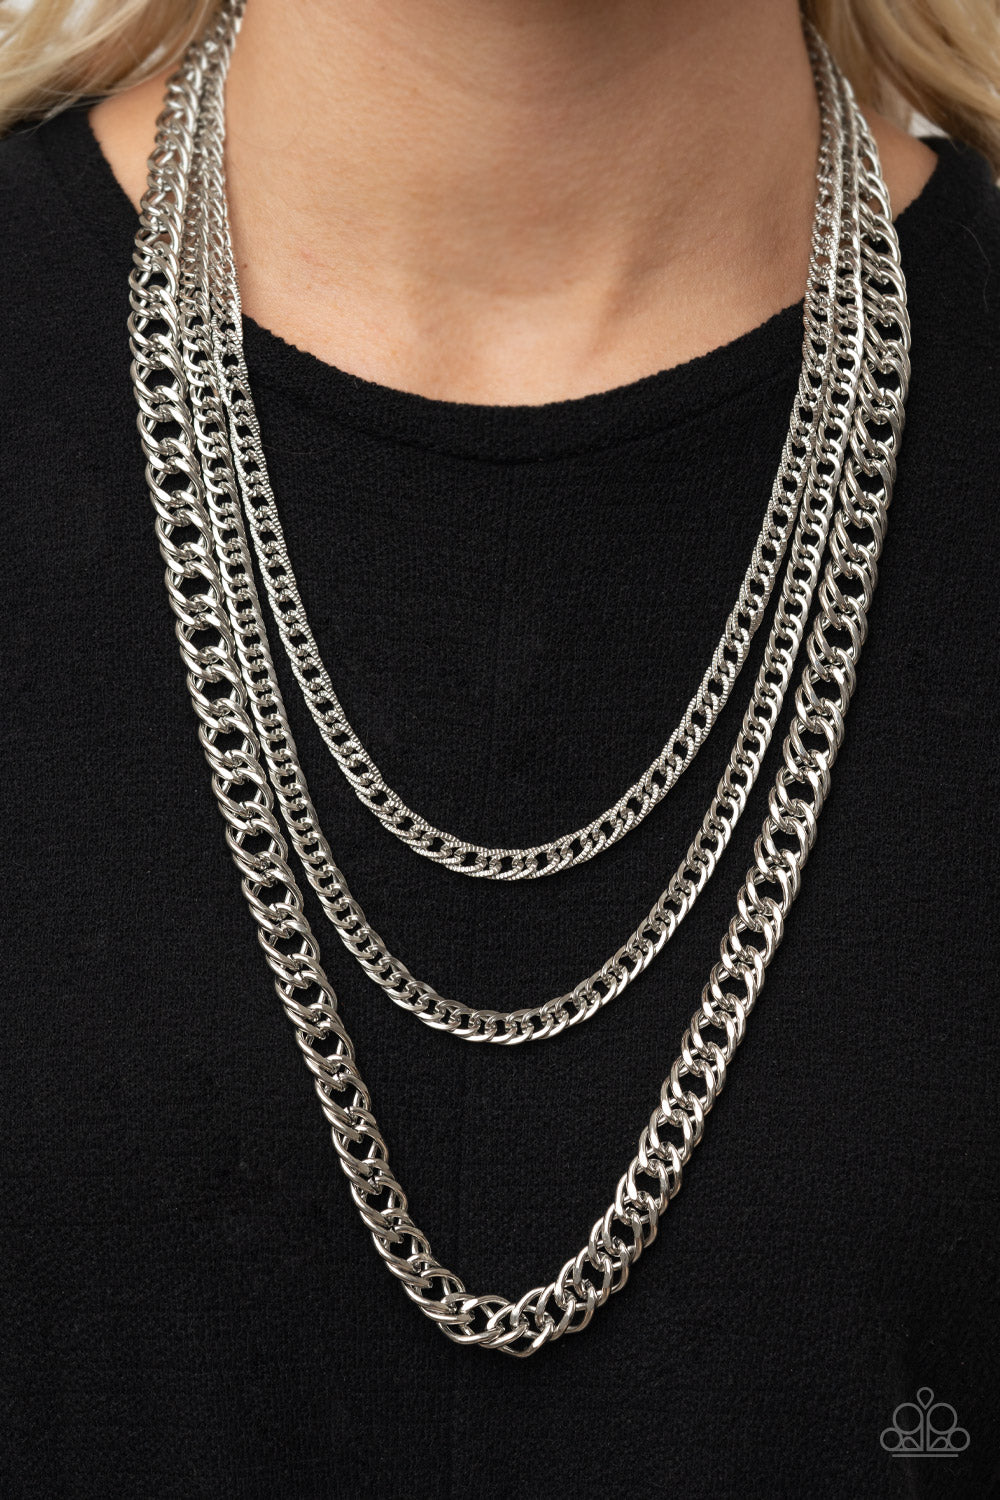 Chain of Champions Silver Necklace Set